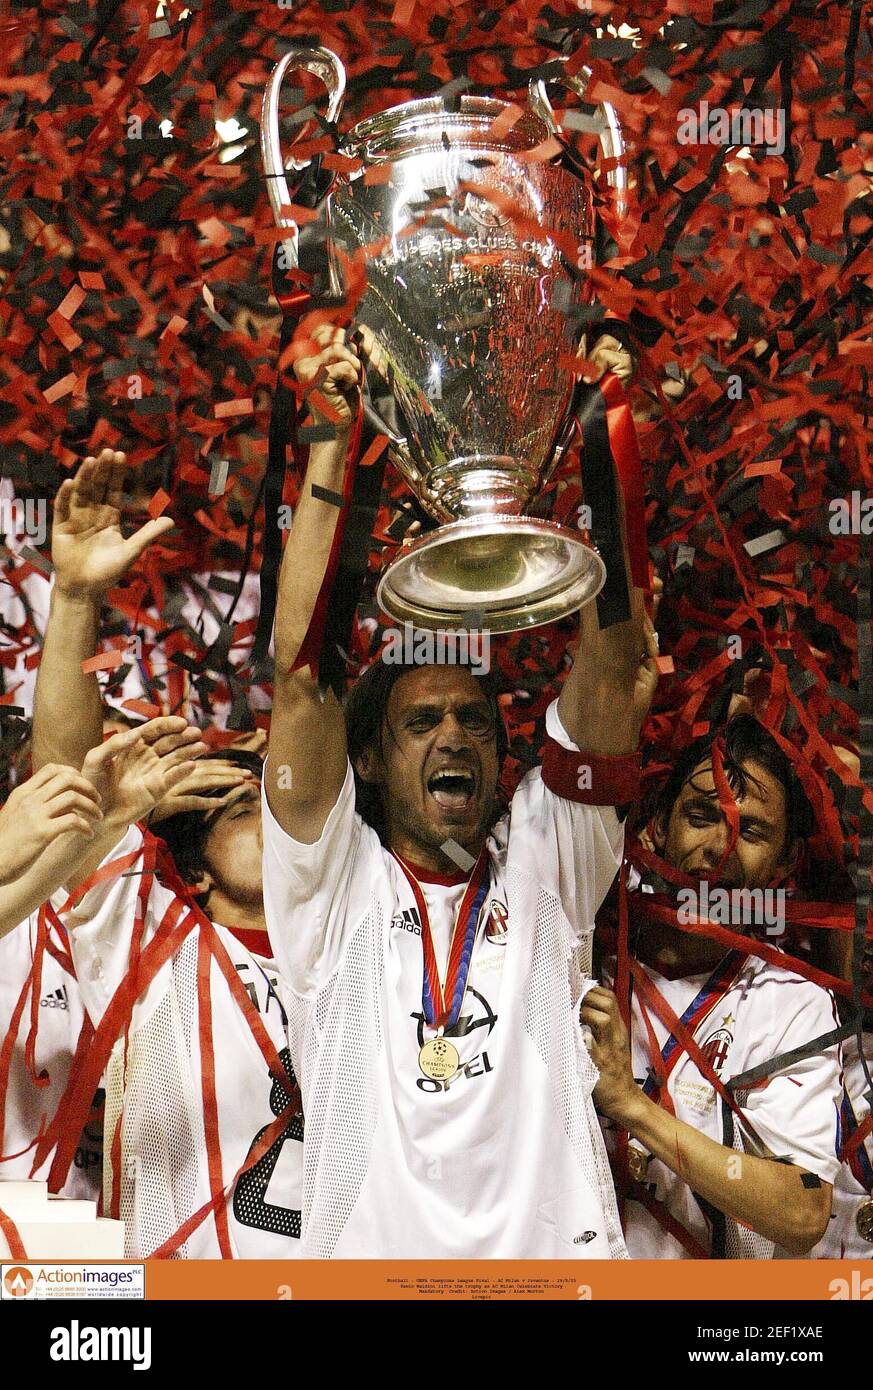 Strip off Shrink Clasp Football - UEFA Champions League Final - AC Milan v Juventus - 28/5/03  Paolo Maldini lifts the trophy as AC Milan Celebrate Victory Mandatory  Credit: Action Images / Alex Morton Livepic Stock Photo - Alamy